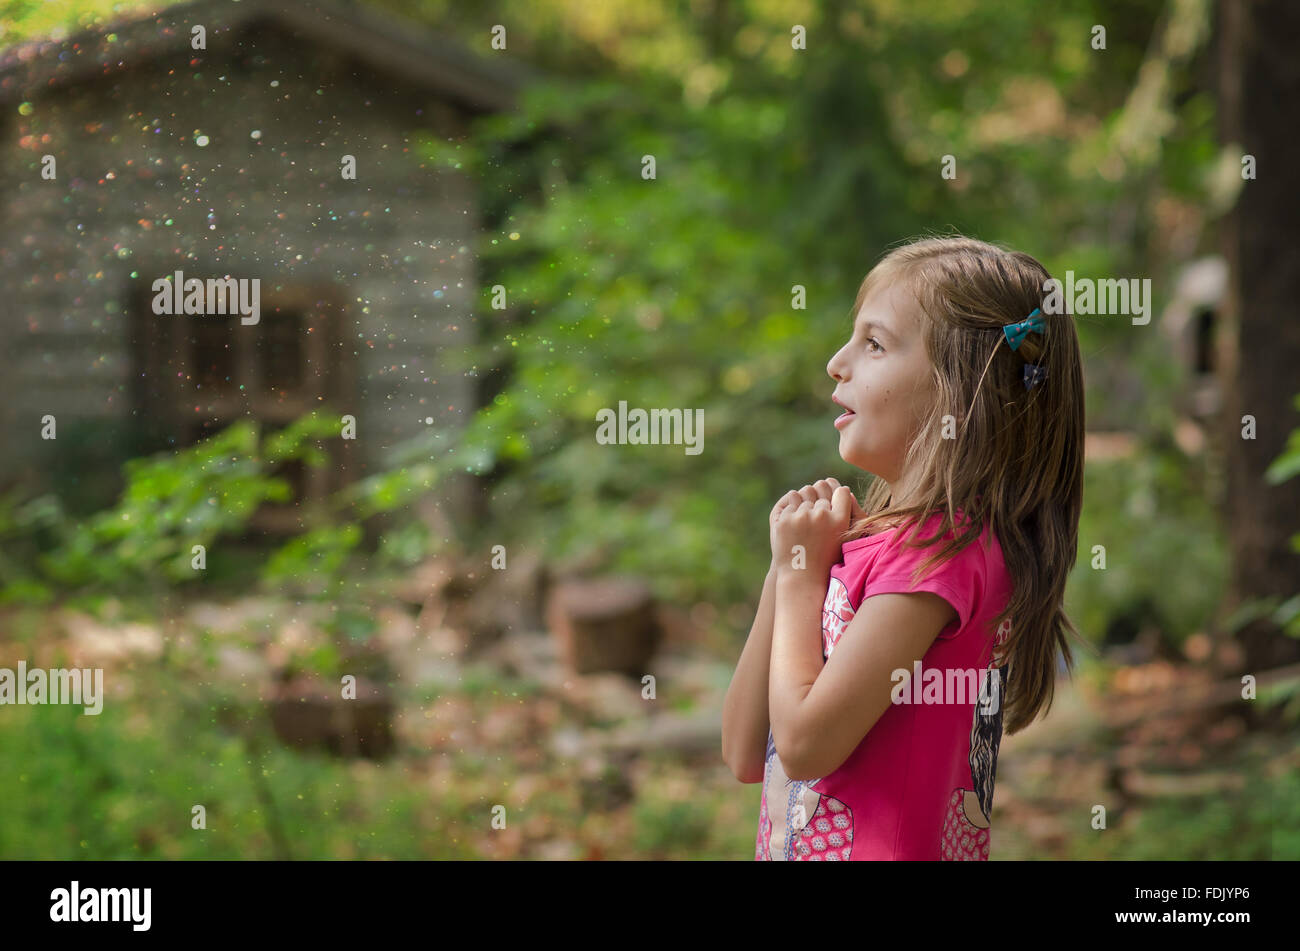 Surprised girl standing in a forest Stock Photo